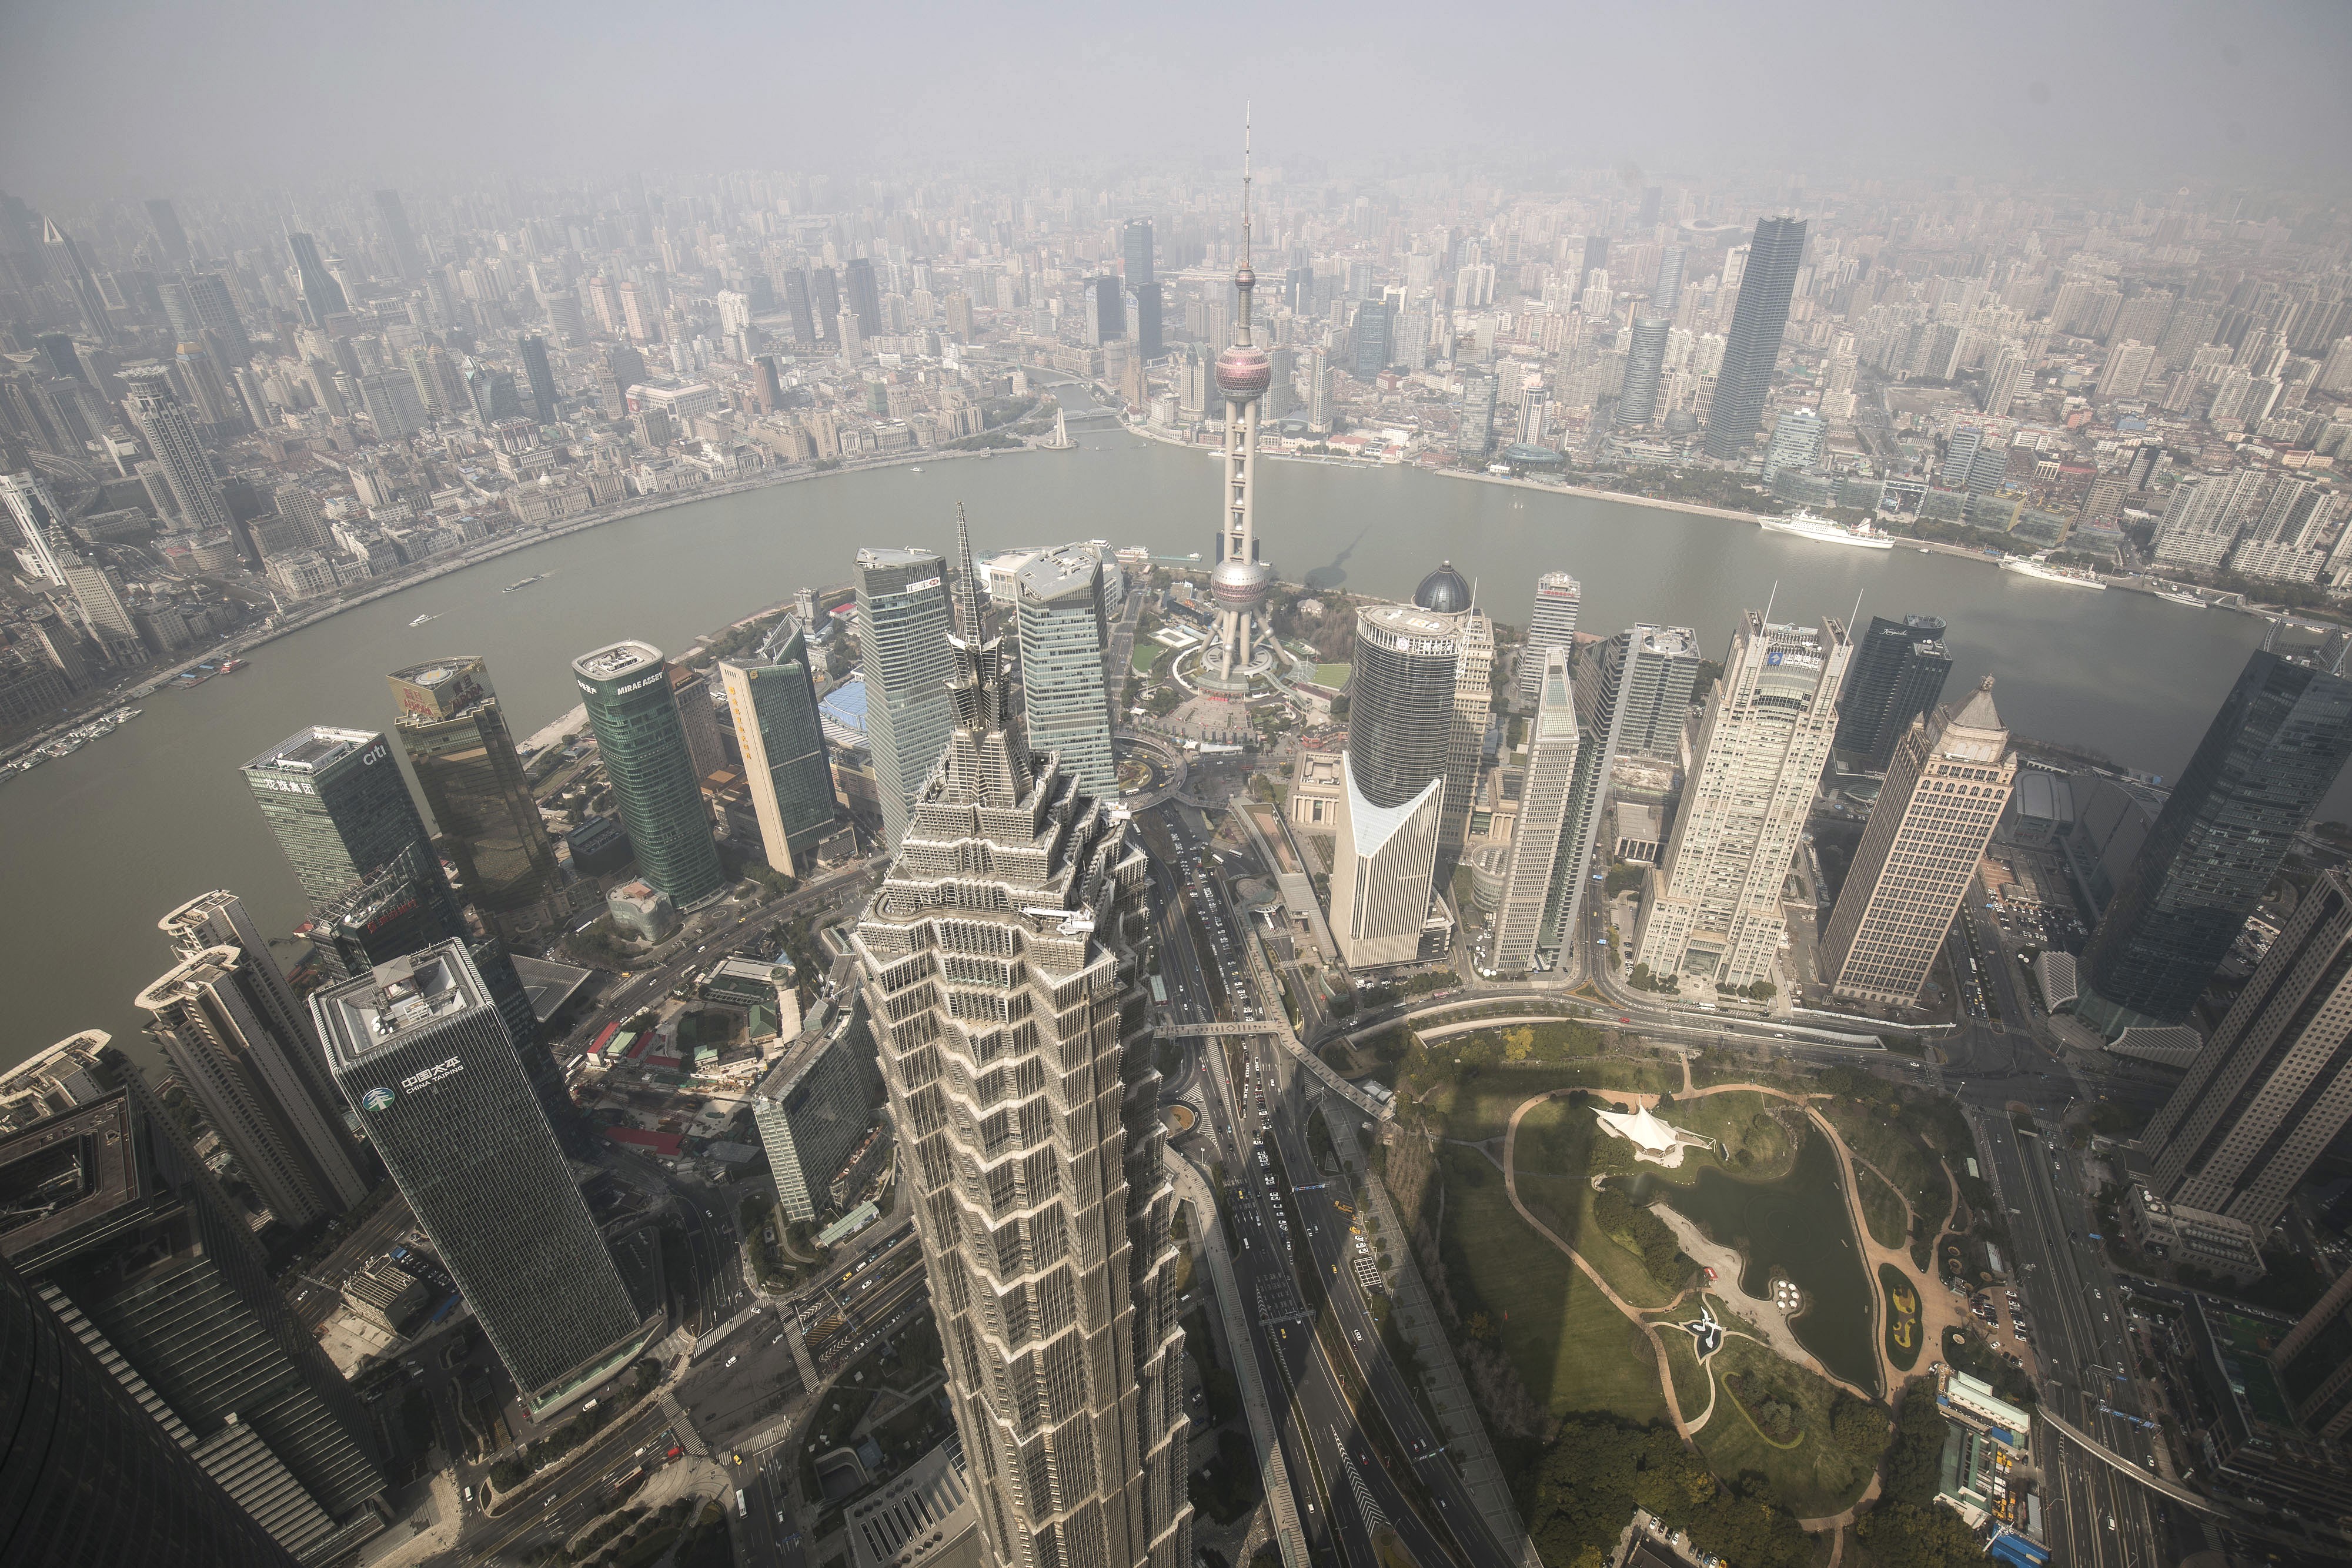 The city as seen from the Shanghai World Financial Centre. The study by BCG says 23 per cent of the jobs in China’s banking, insurance and securities sectors will be affected. It also says AI will improve the efficiency of the remaining employees by 38 per cent. Photo: Bloomberg